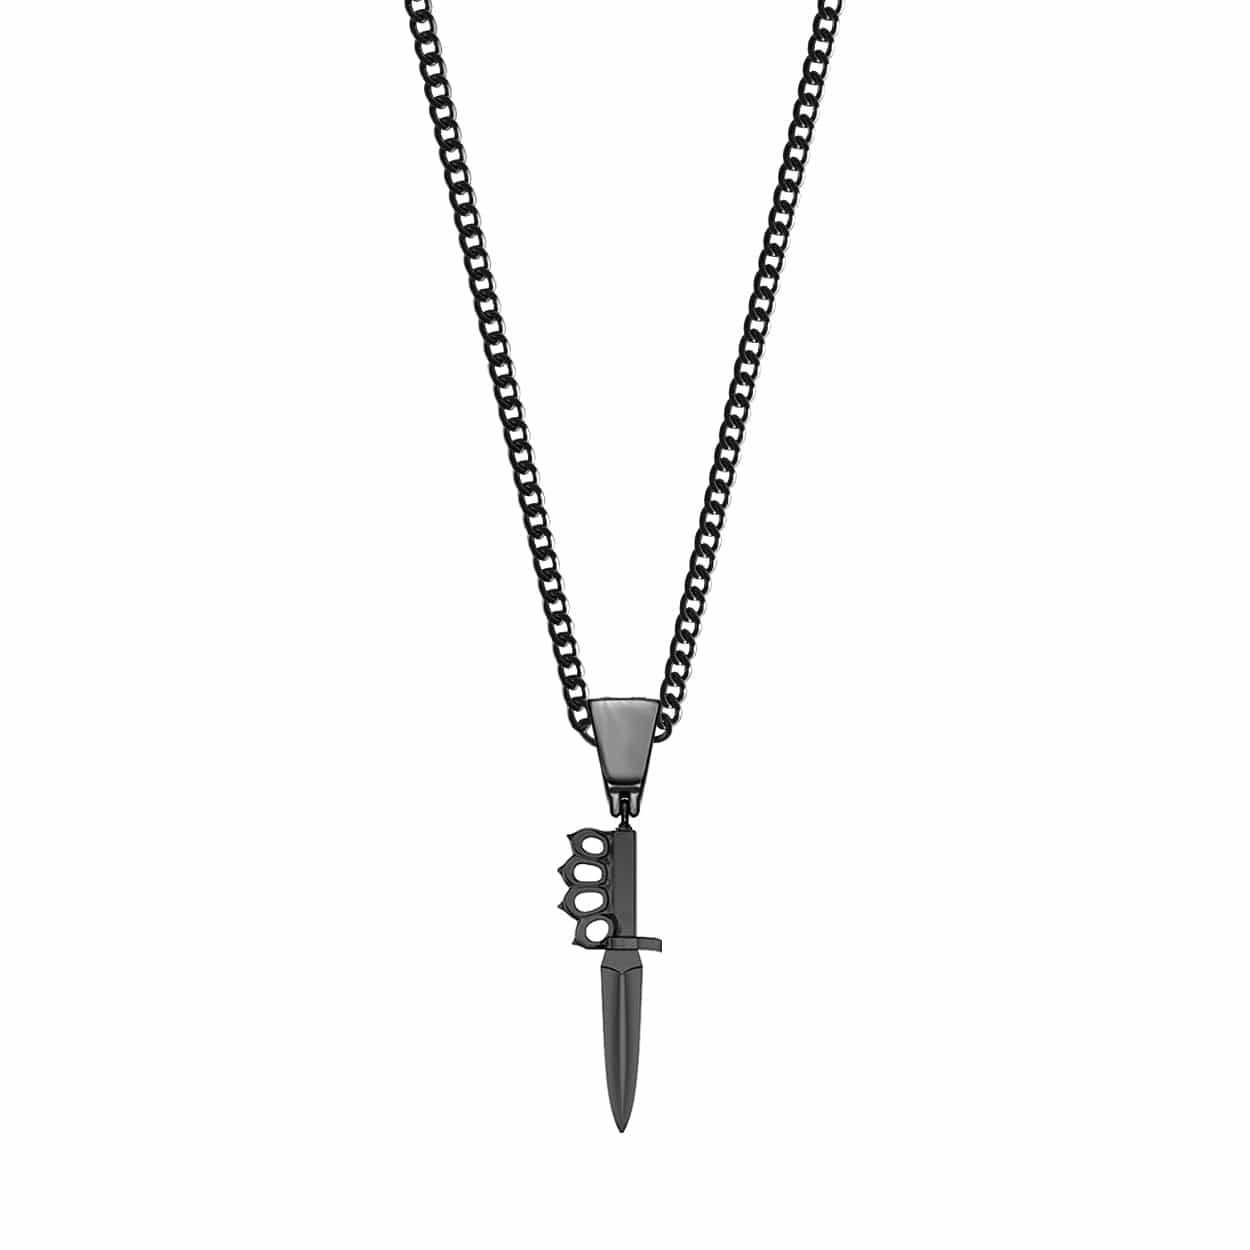 Mister Trench Necklace